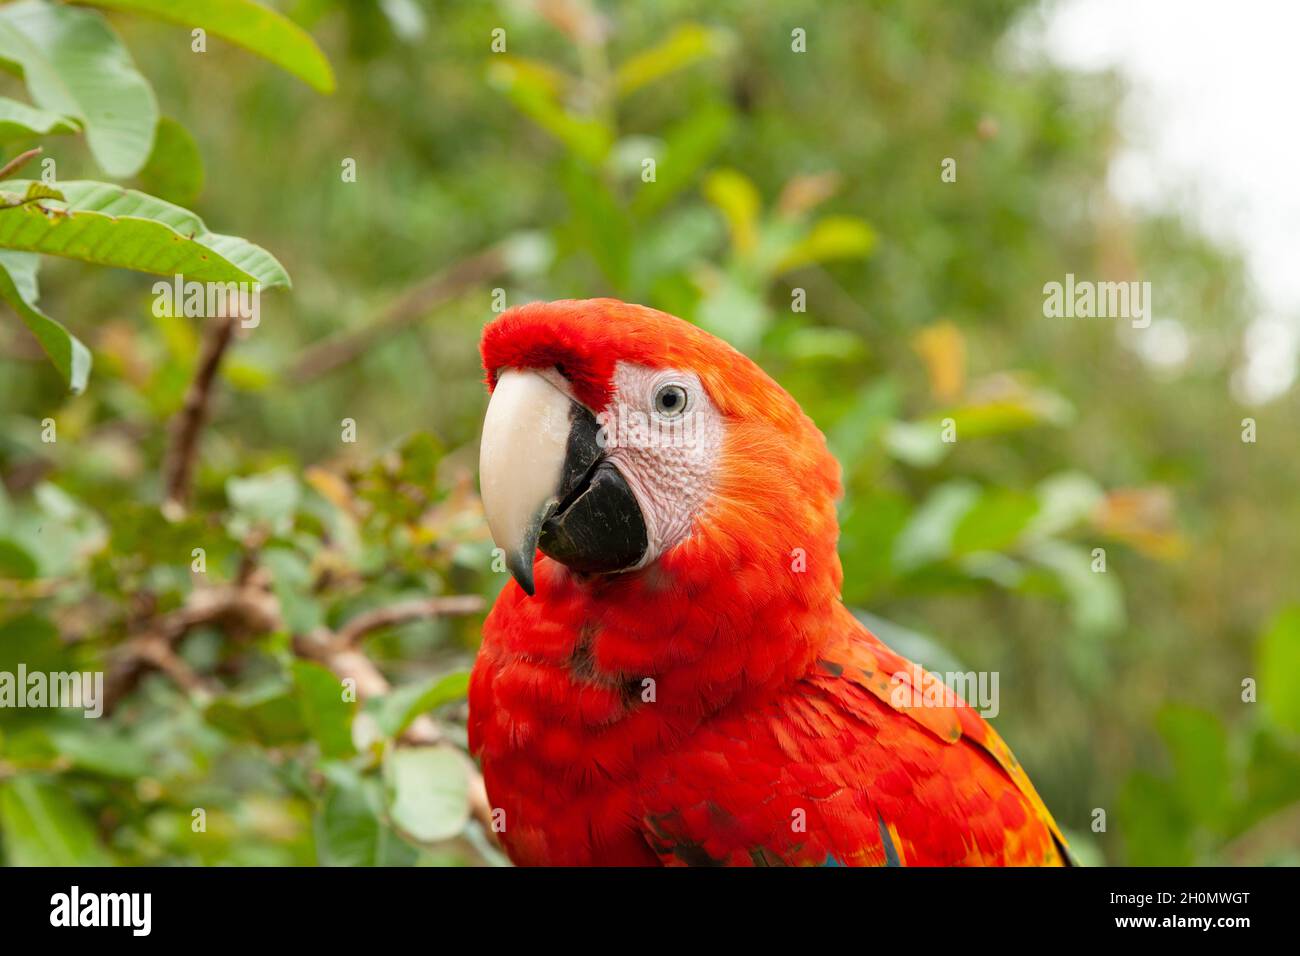 Specimen of True parrot, Psittacoidea family, a red and very curious parrot, observes from a branch, in the Amazon rainforest, at the Dos Loritos wild Stock Photo